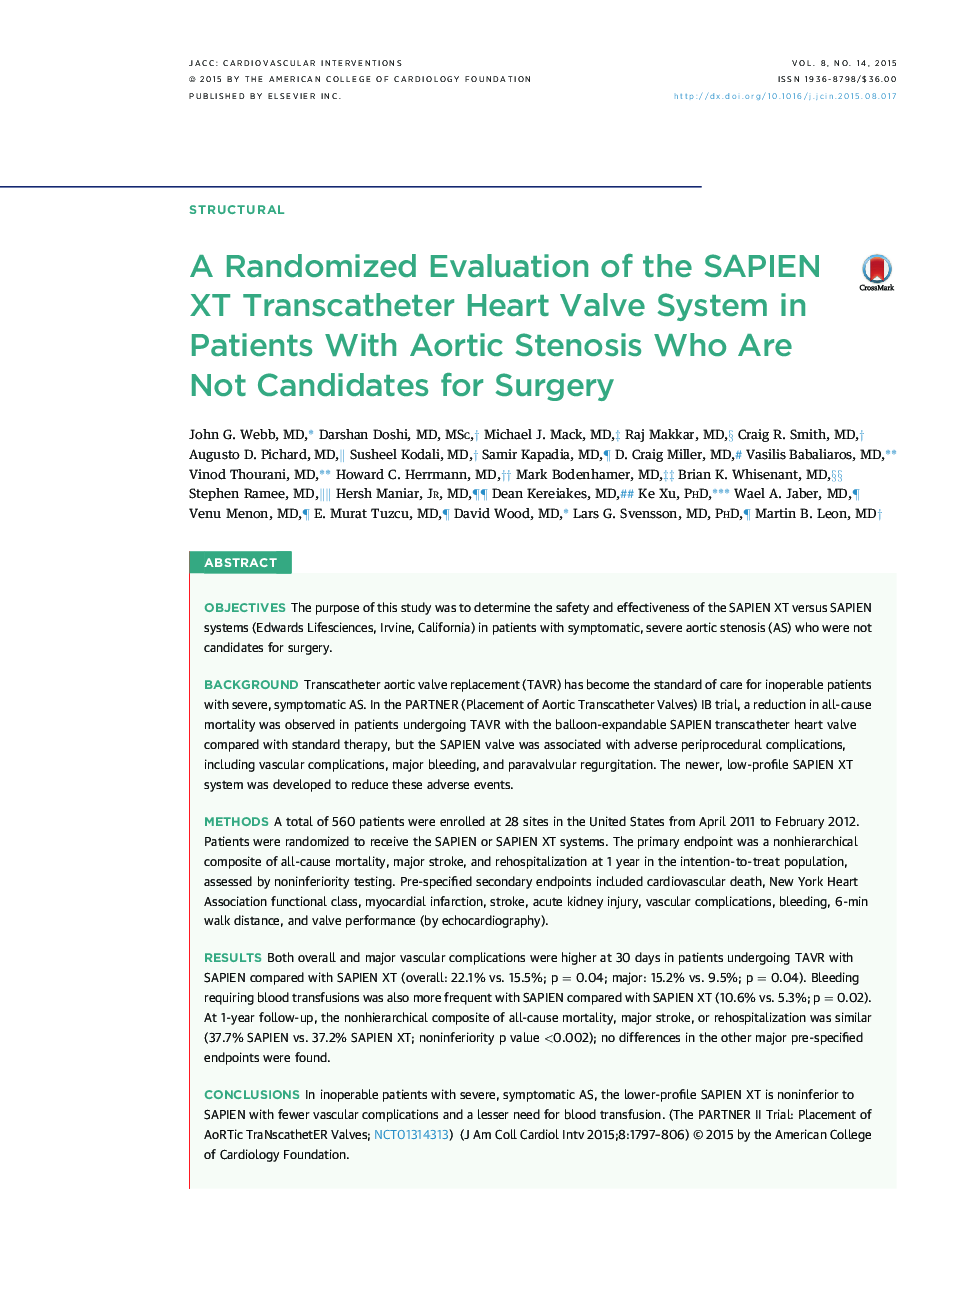 A Randomized Evaluation of the SAPIEN XT Transcatheter Heart Valve System in Patients With Aortic Stenosis Who Are Not Candidates for Surgery 